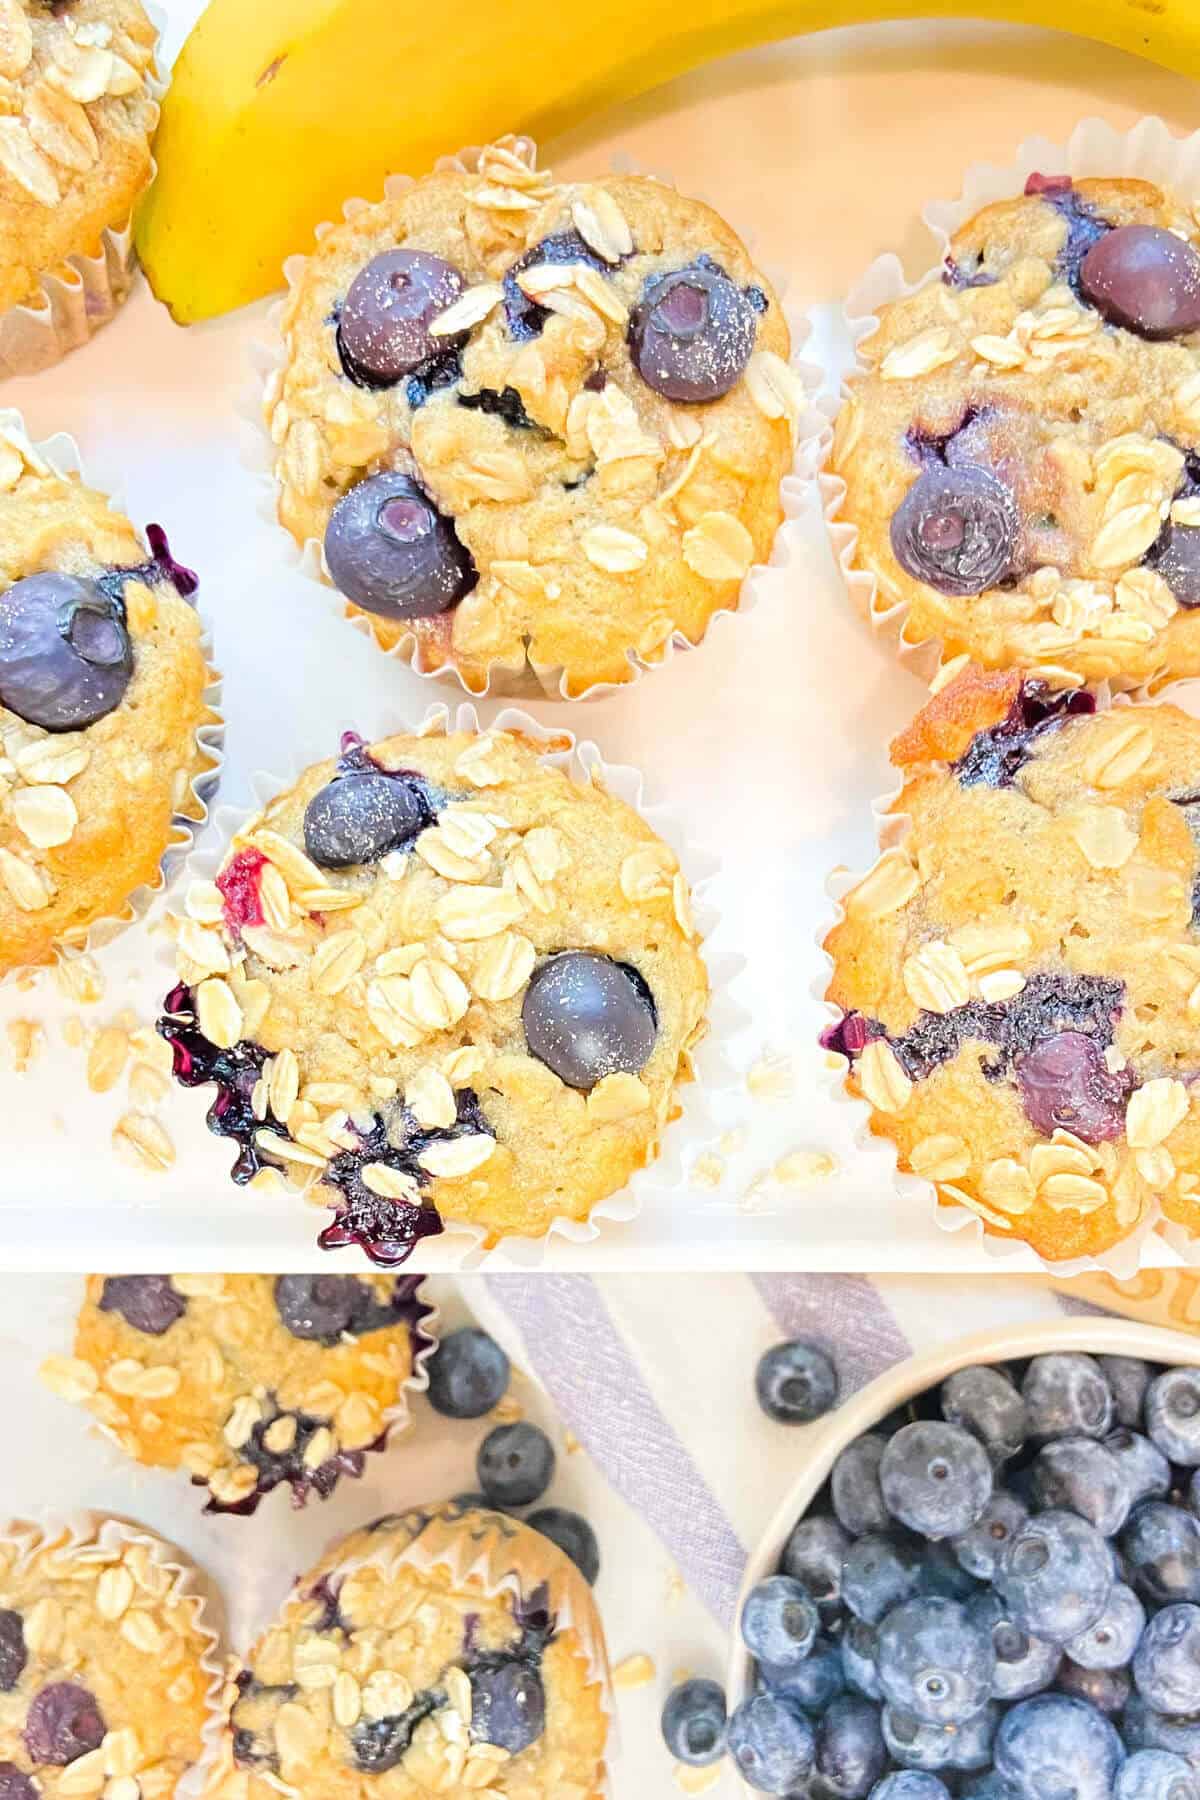 Muffins served with fresh fruit.